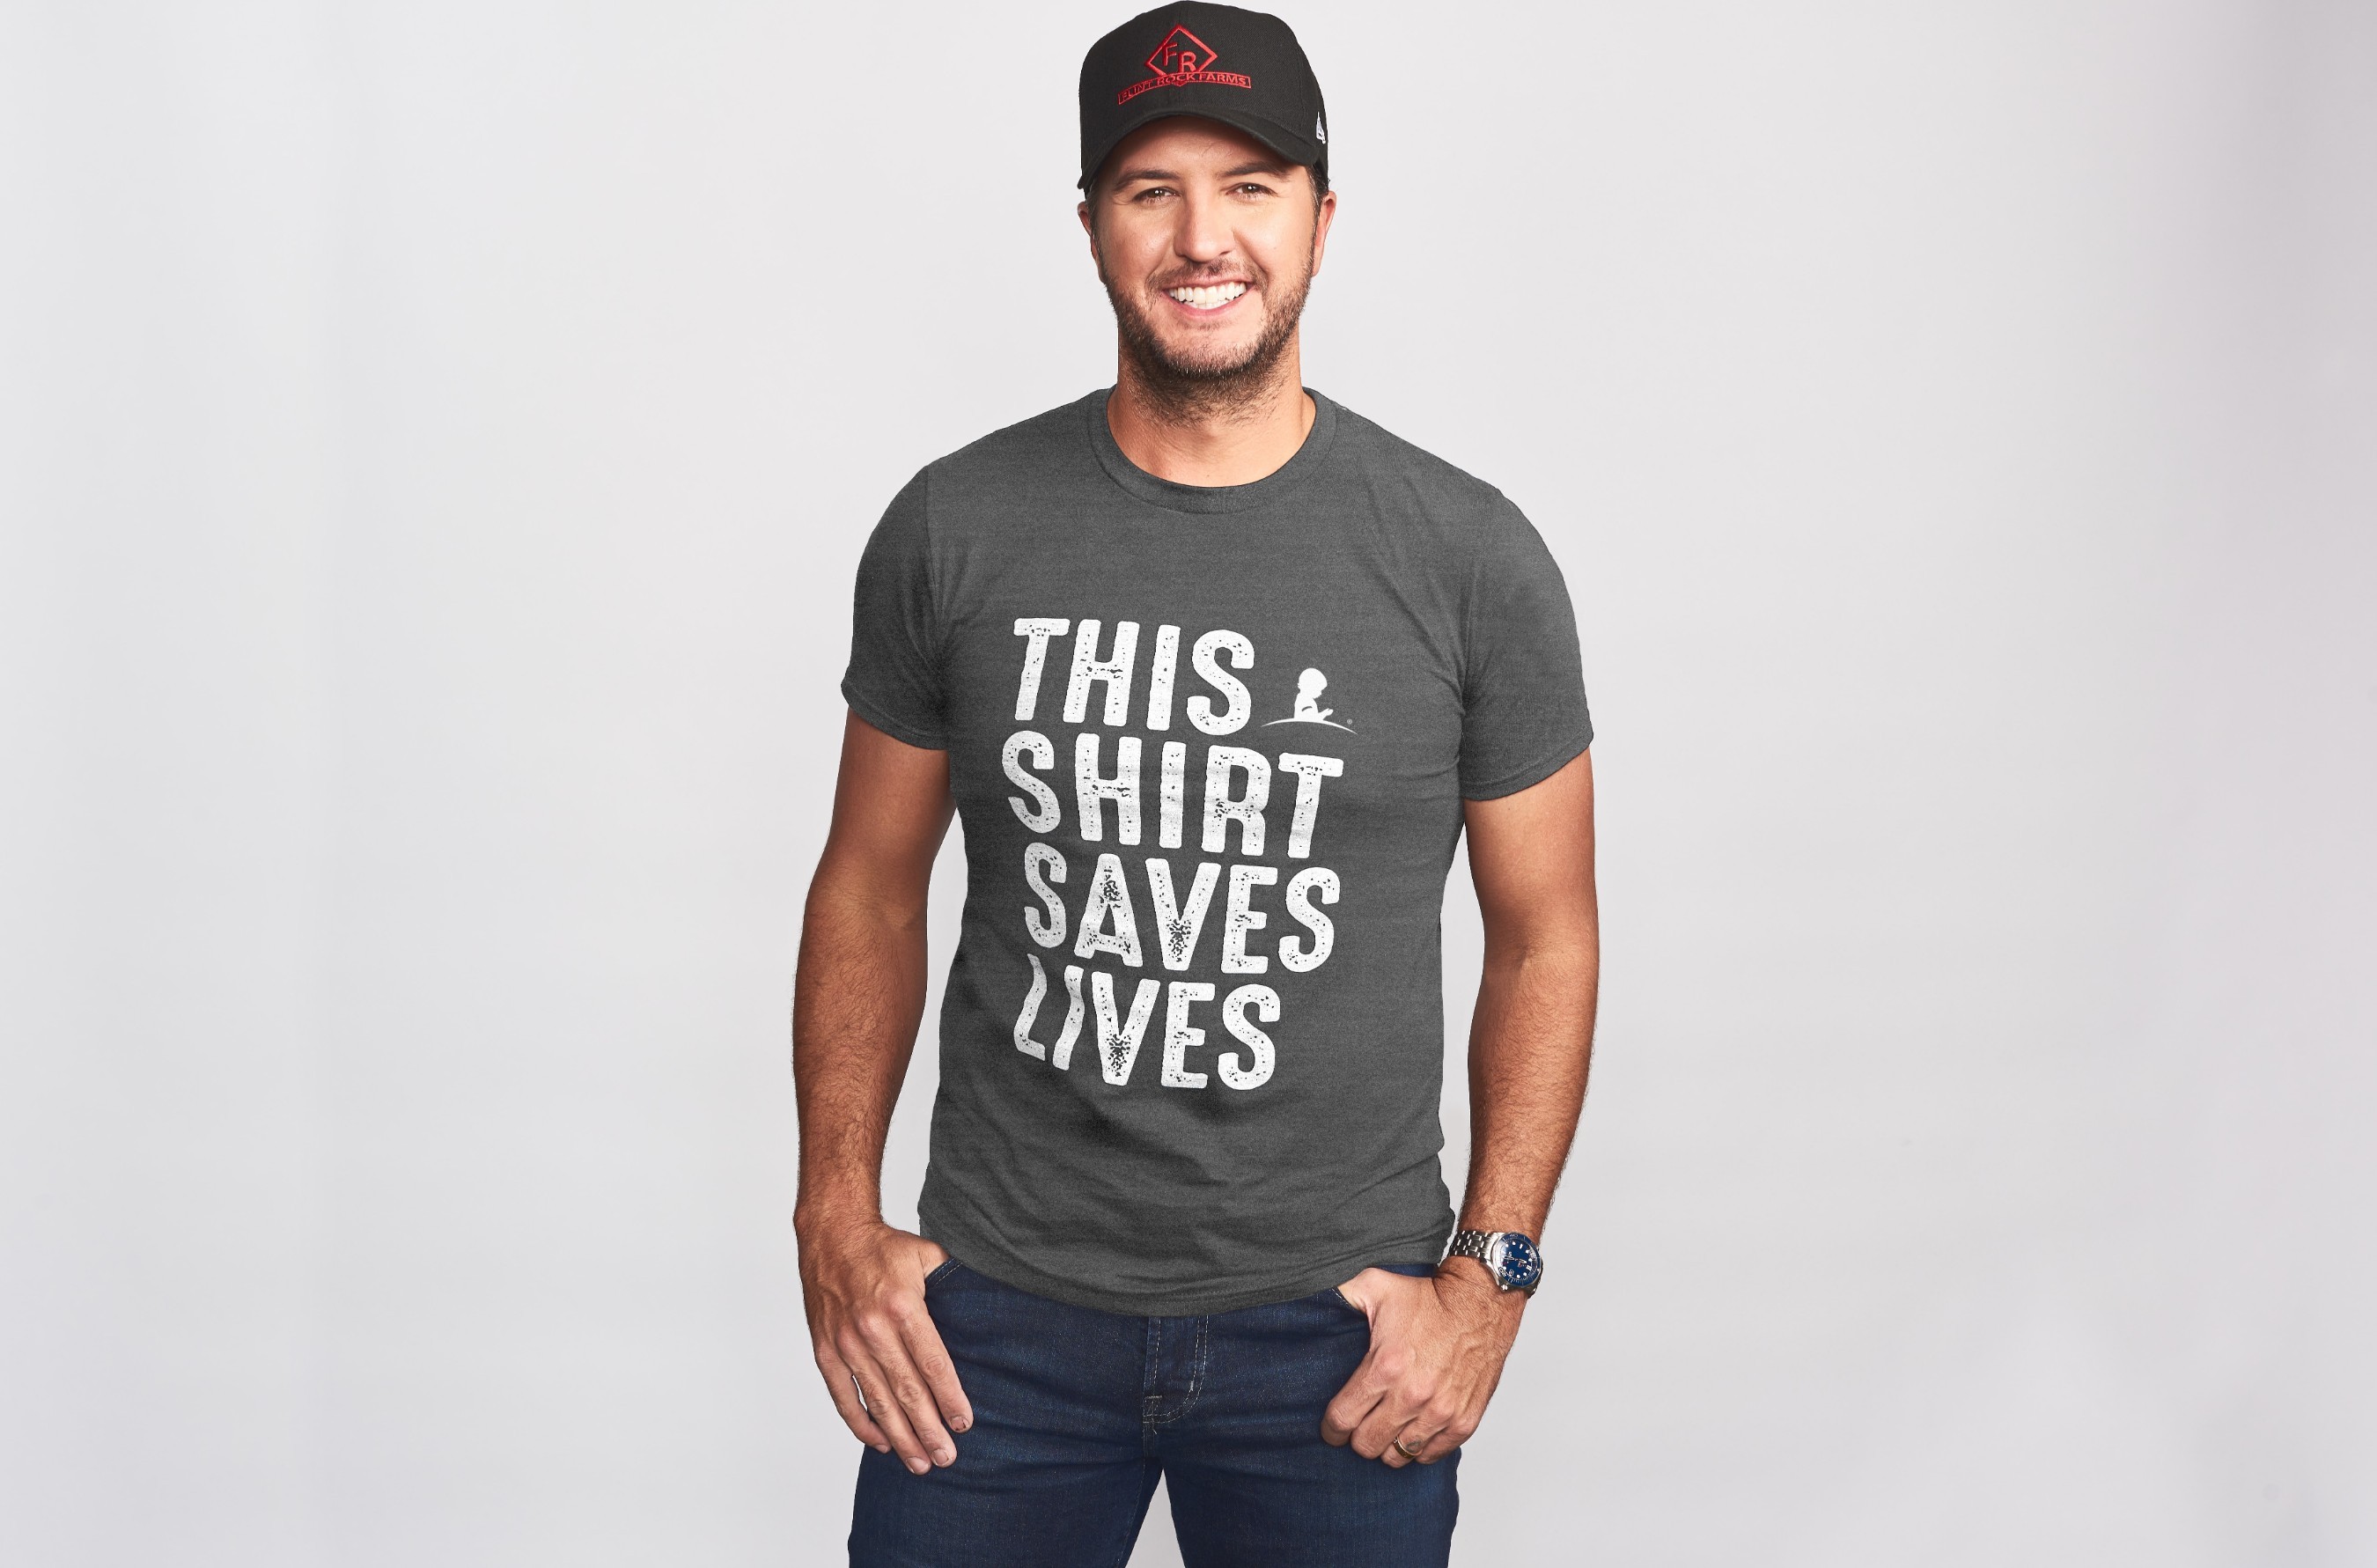 Third annual This Shirt Saves Lives campaign launches to support St. Jude Children's Research Hospital